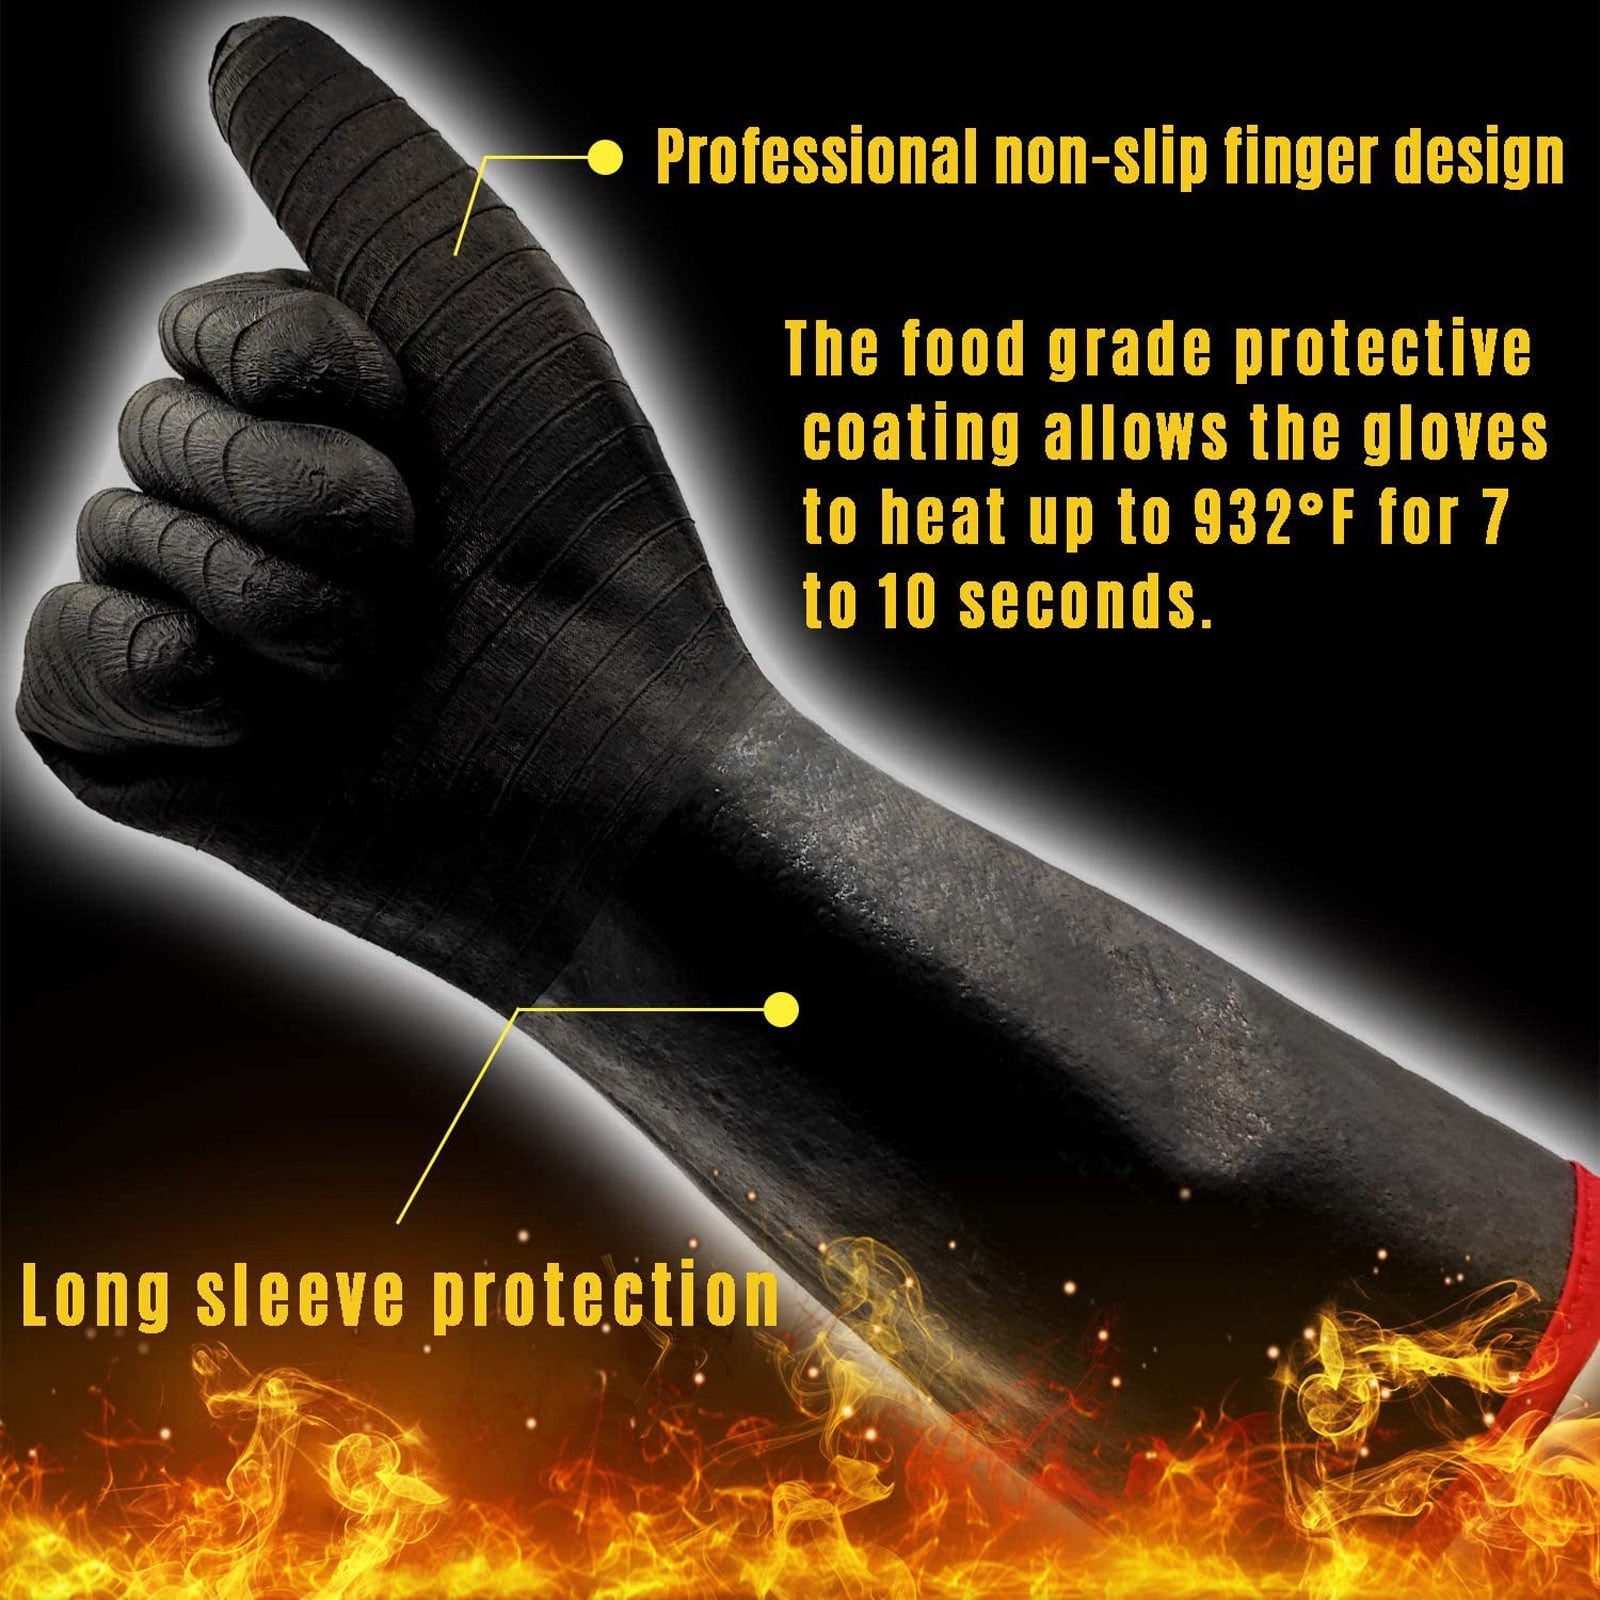 BBQ Gloves 932°F Heat Proof Resistant Bowl Holder Fire Baking Anti-scalding 